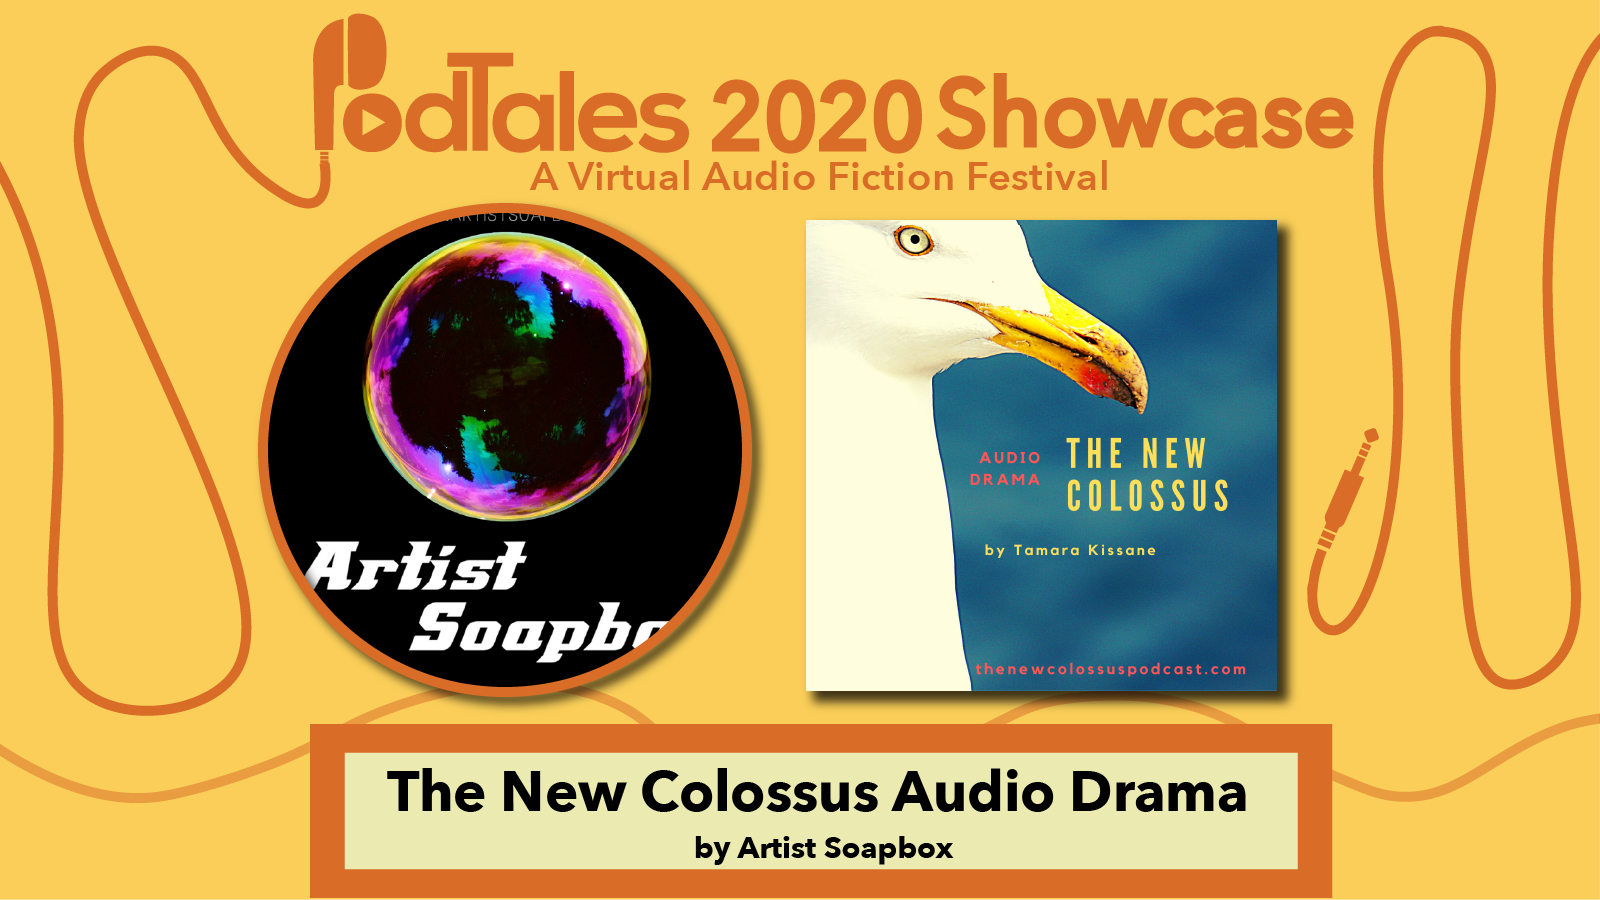 Text reading “PodTales 2020 Showcase: A Virtual Audio Fiction Festival”, Artist Soapbox Production Logo, Show Art for The New Colossus, Text reading “The New Colossus Audio Drama by Artis Soapbox”